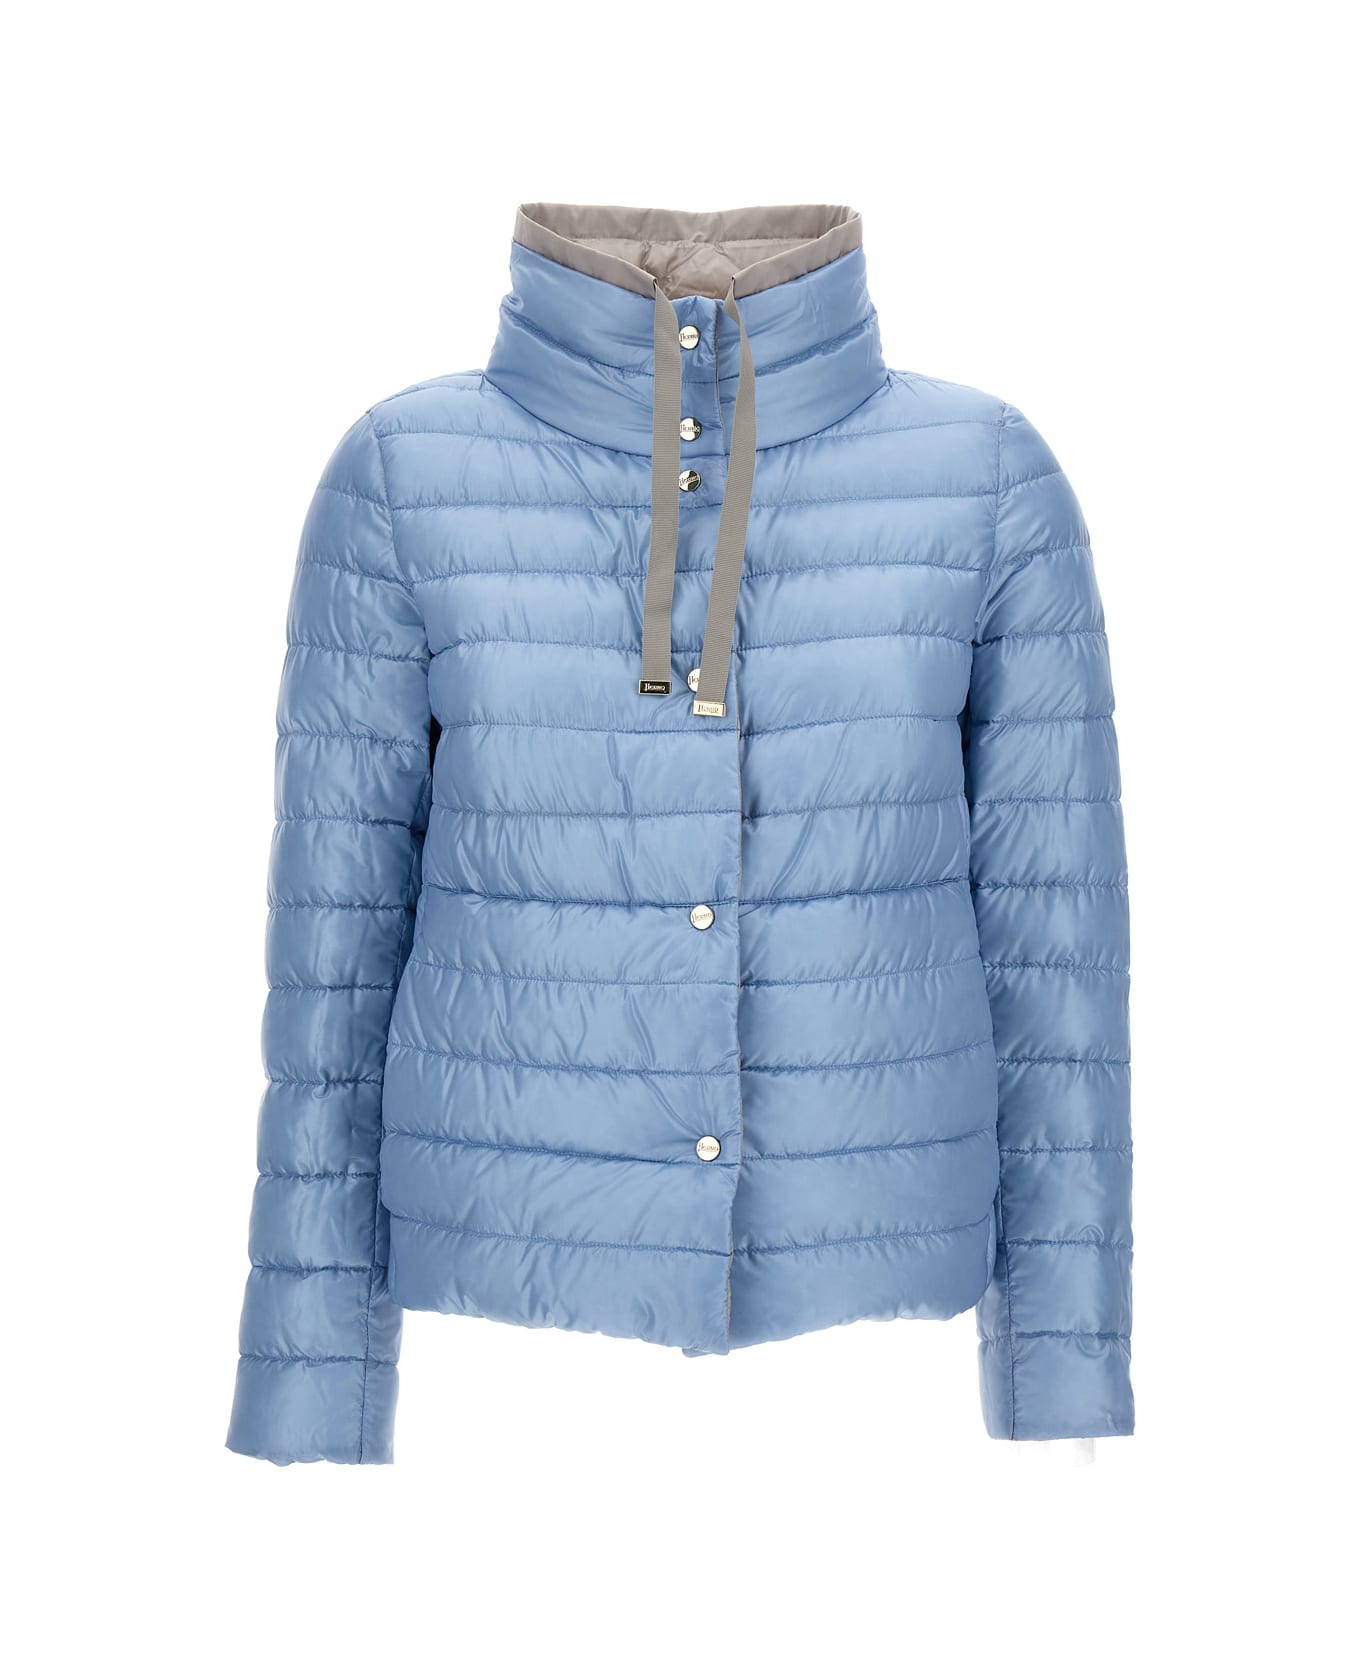 Herno Light Gray Reversible High Neck Down Jacket In Technical Fabric Woman - Multicolor